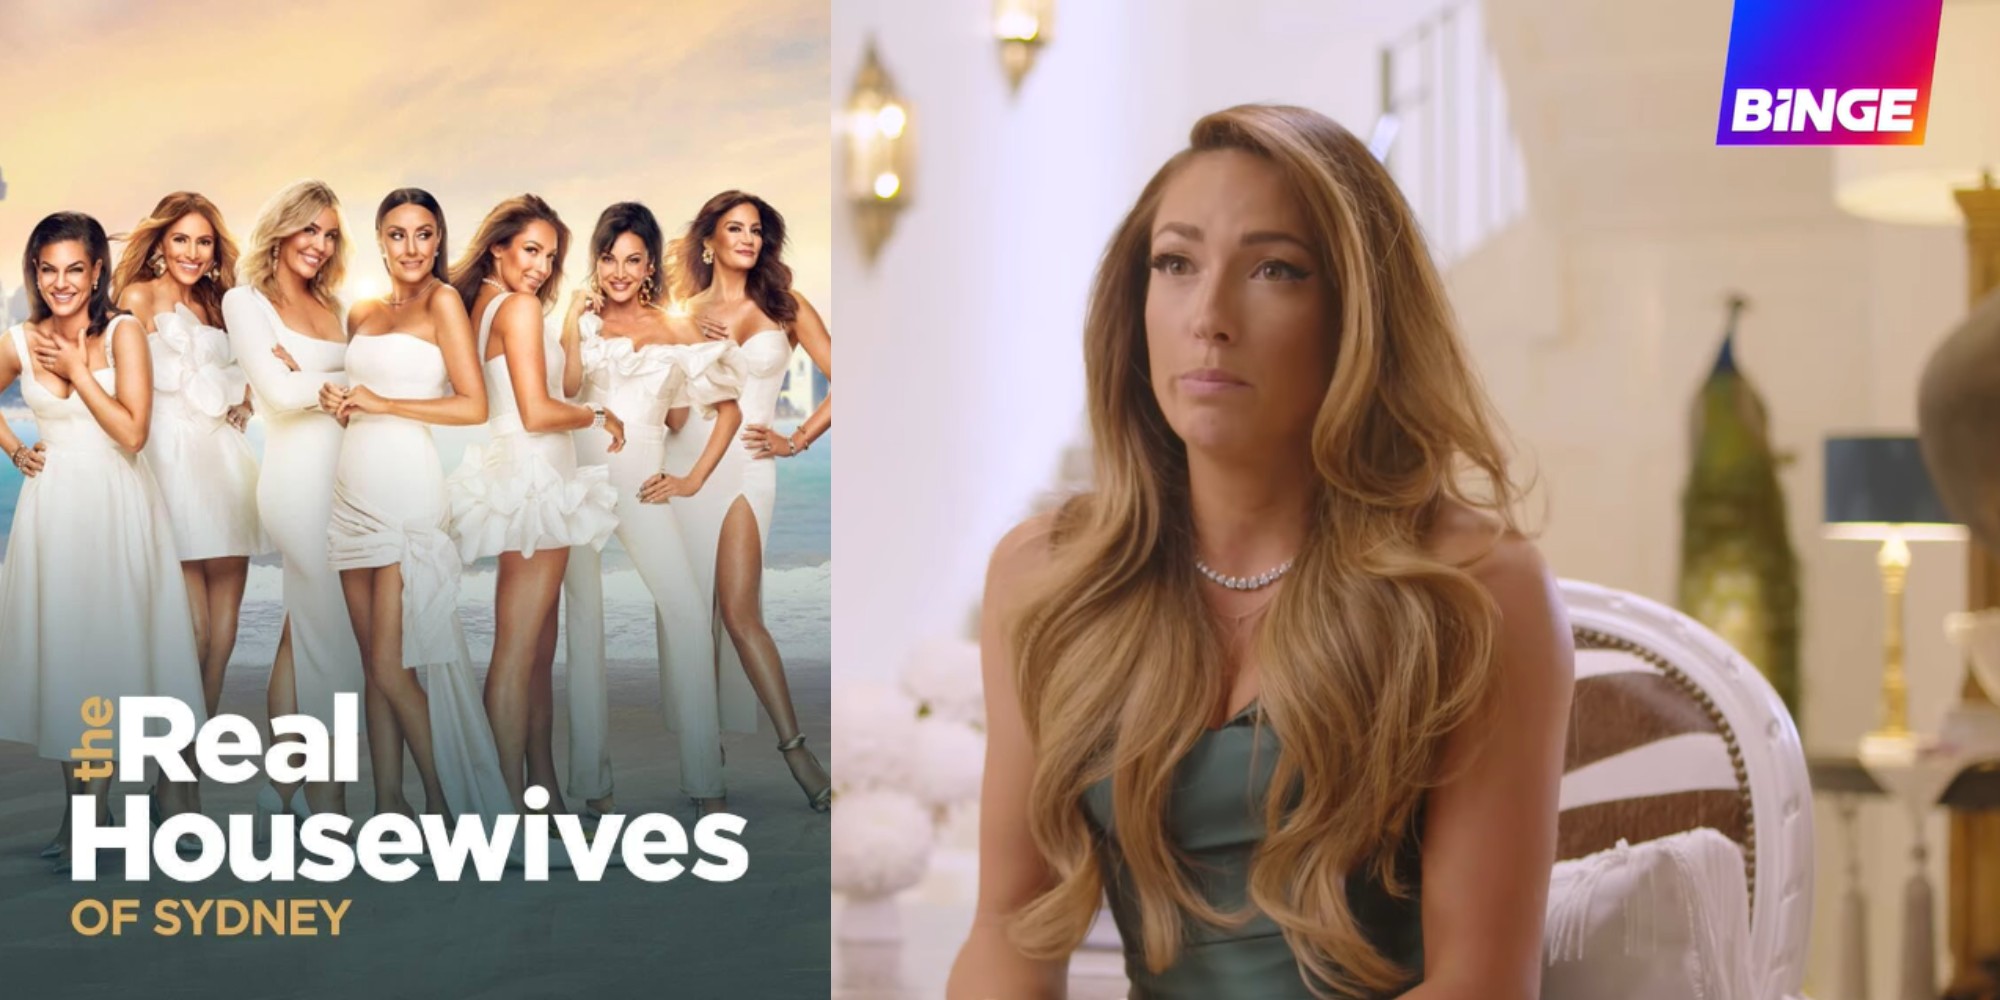 How To Watch The Real Housewives of Sydney Season 2 Episodes?